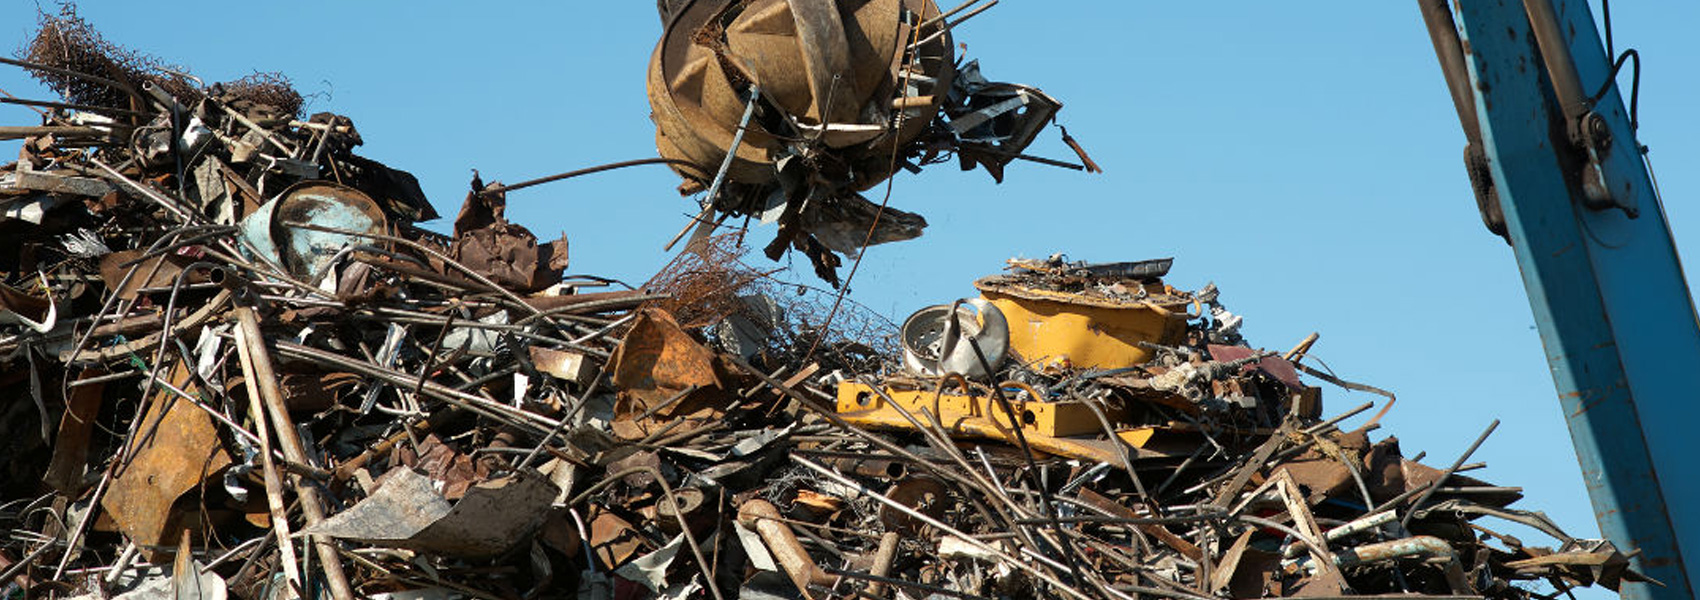 Lead Scrap Metal Collecting Tips And Advice!